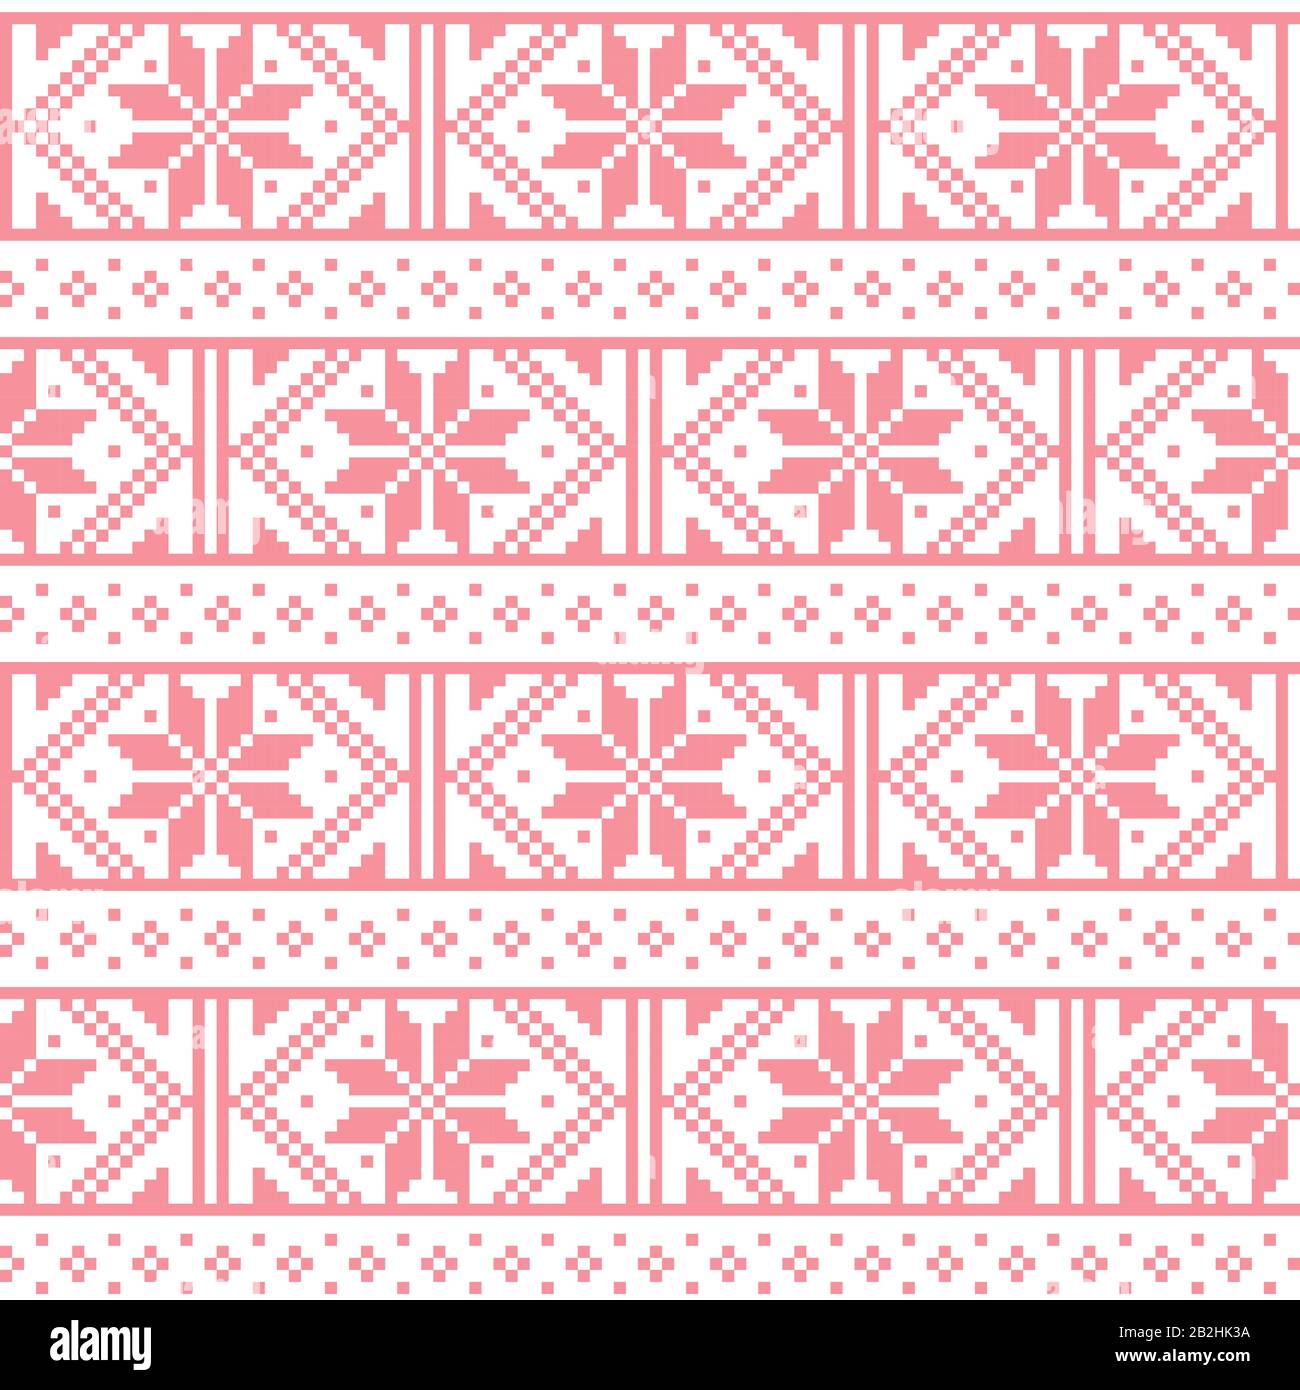 Fair Isle style traditional knitwear vector seamless pattern from Scotland, knit repetitive design with snowflakes Stock Vector